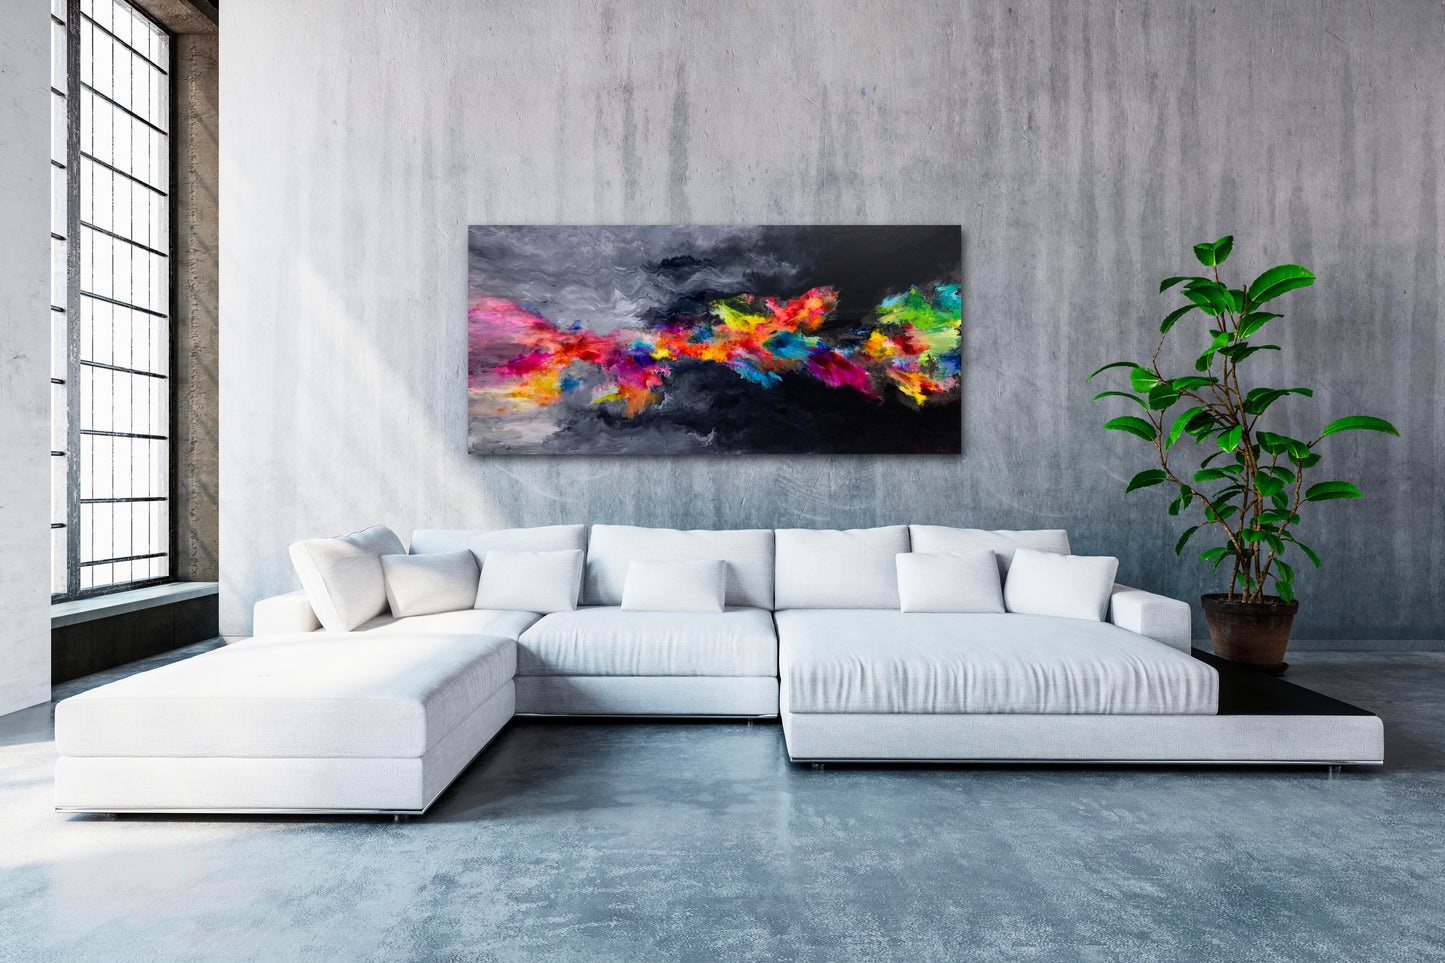 Coming Out 36" X 72" - SOLD